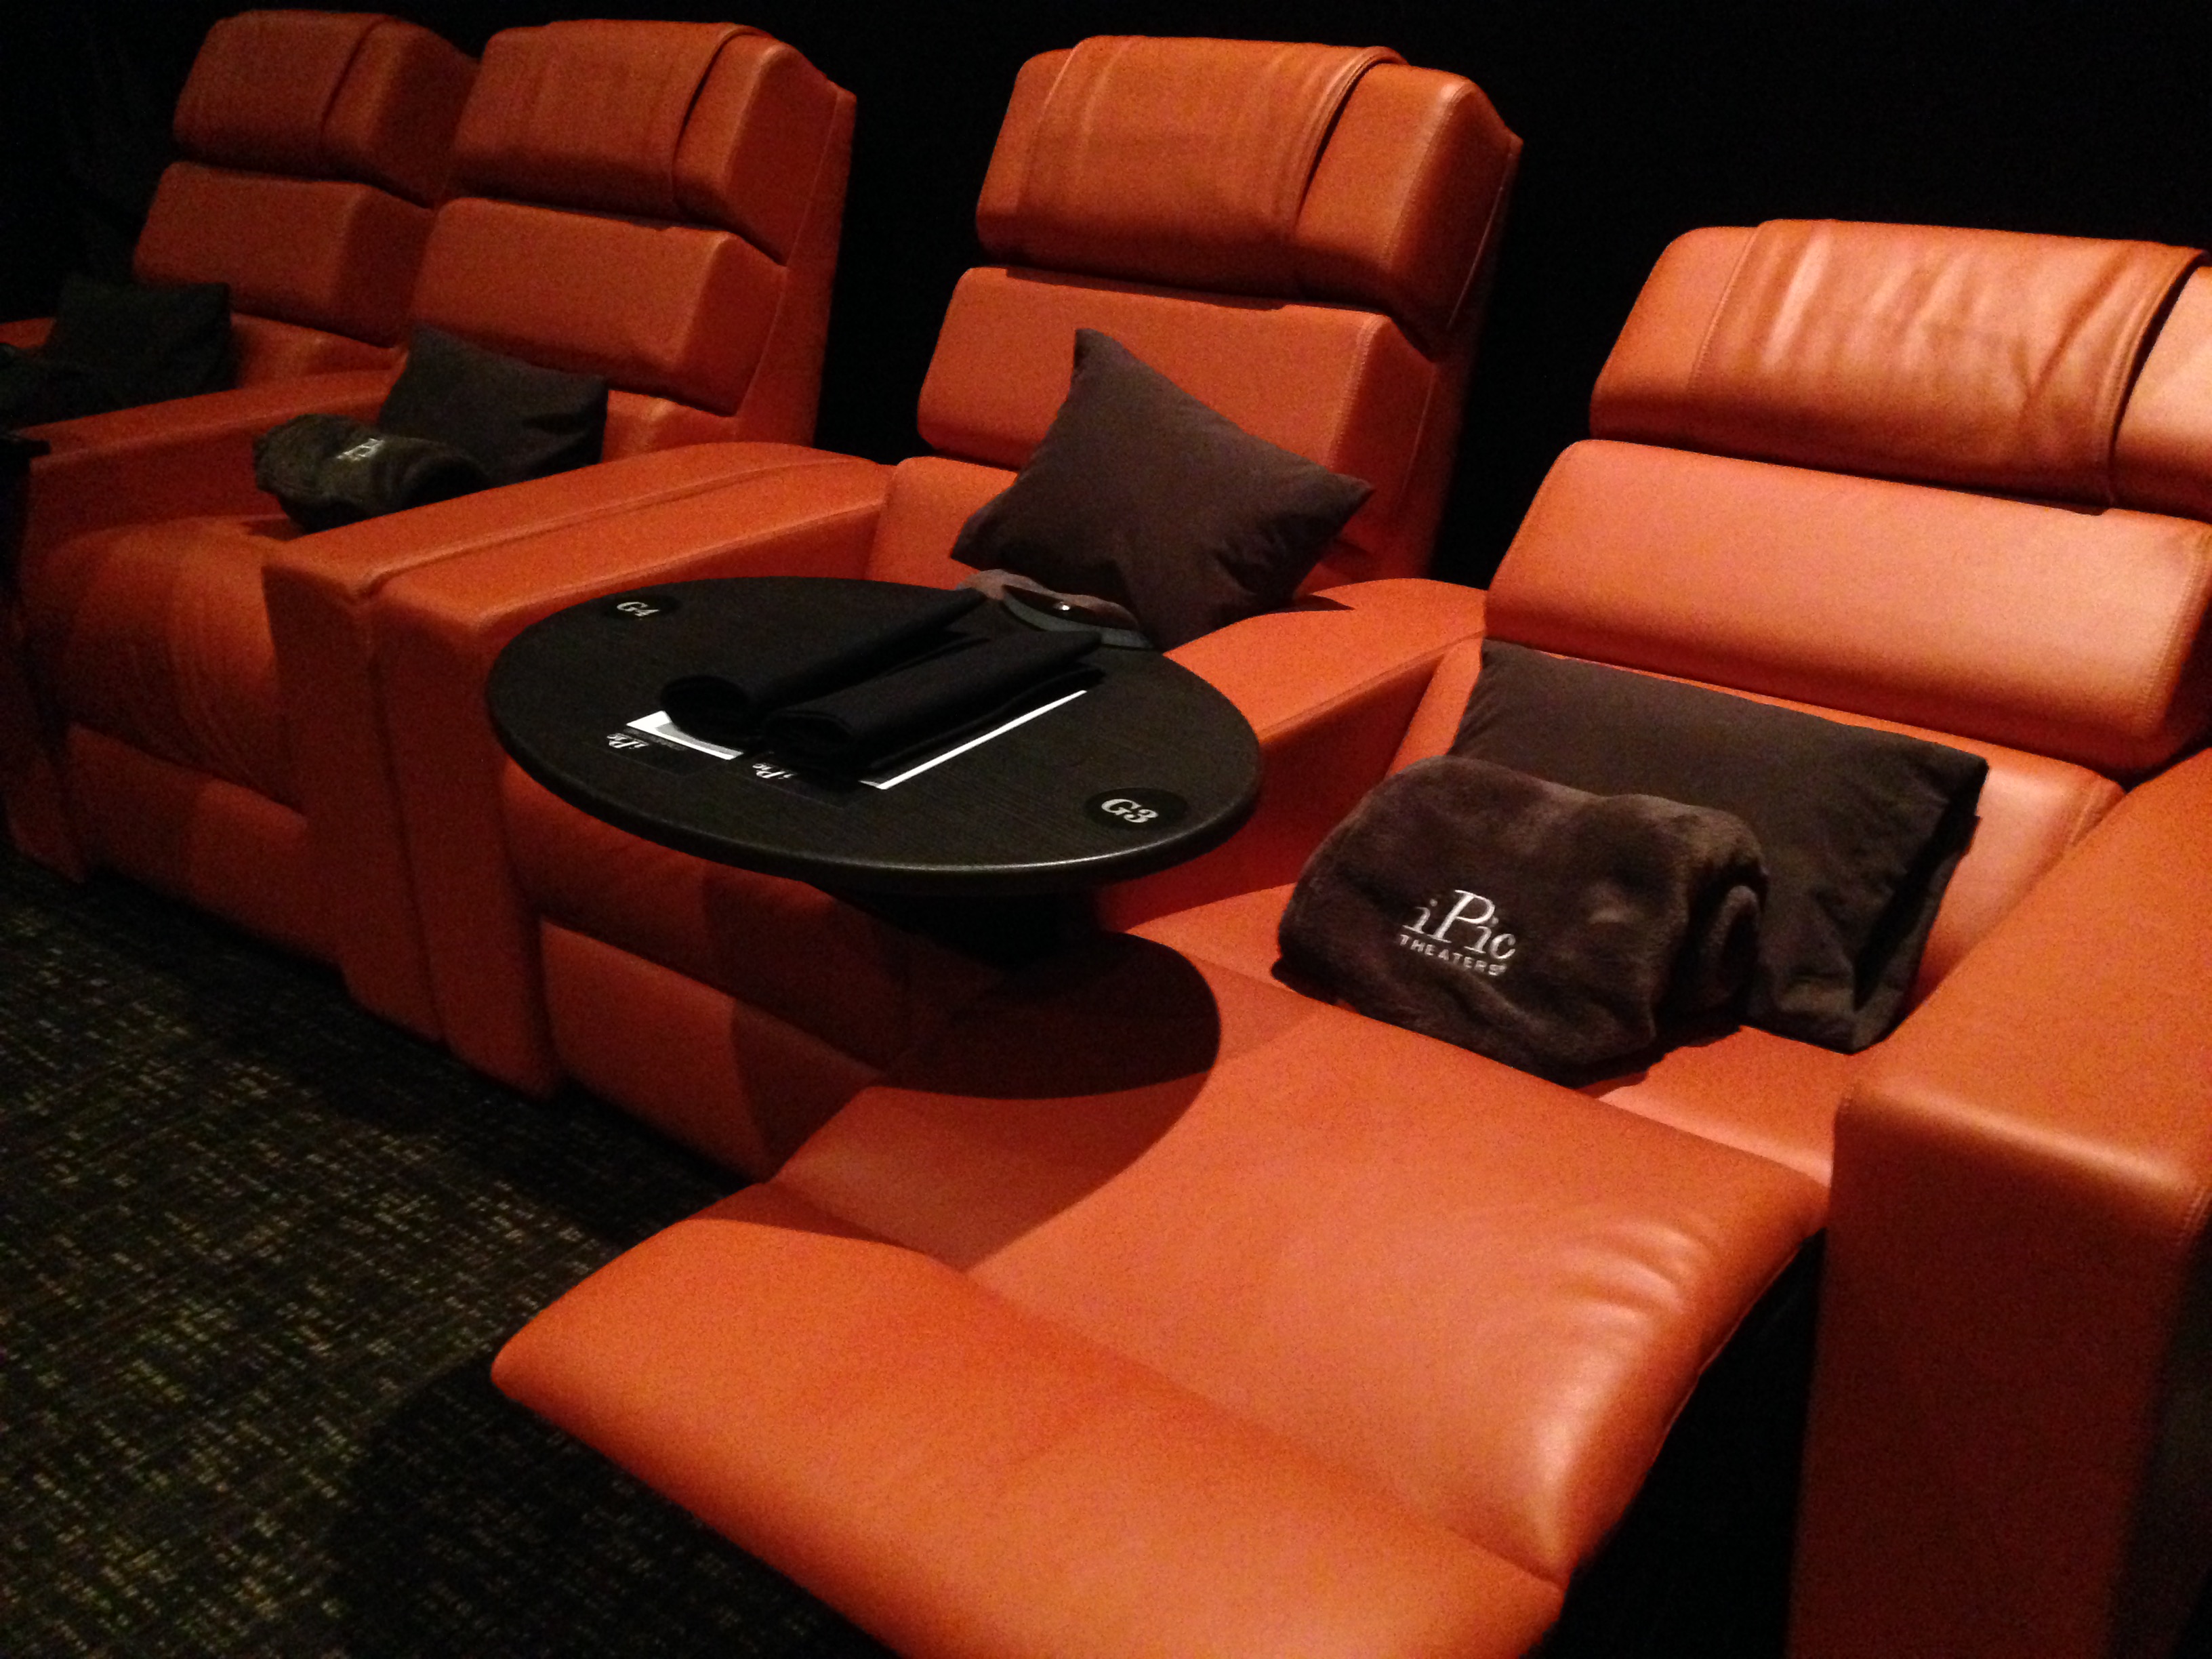 Second upscale movie theater debuts in Bethesda - WTOP News